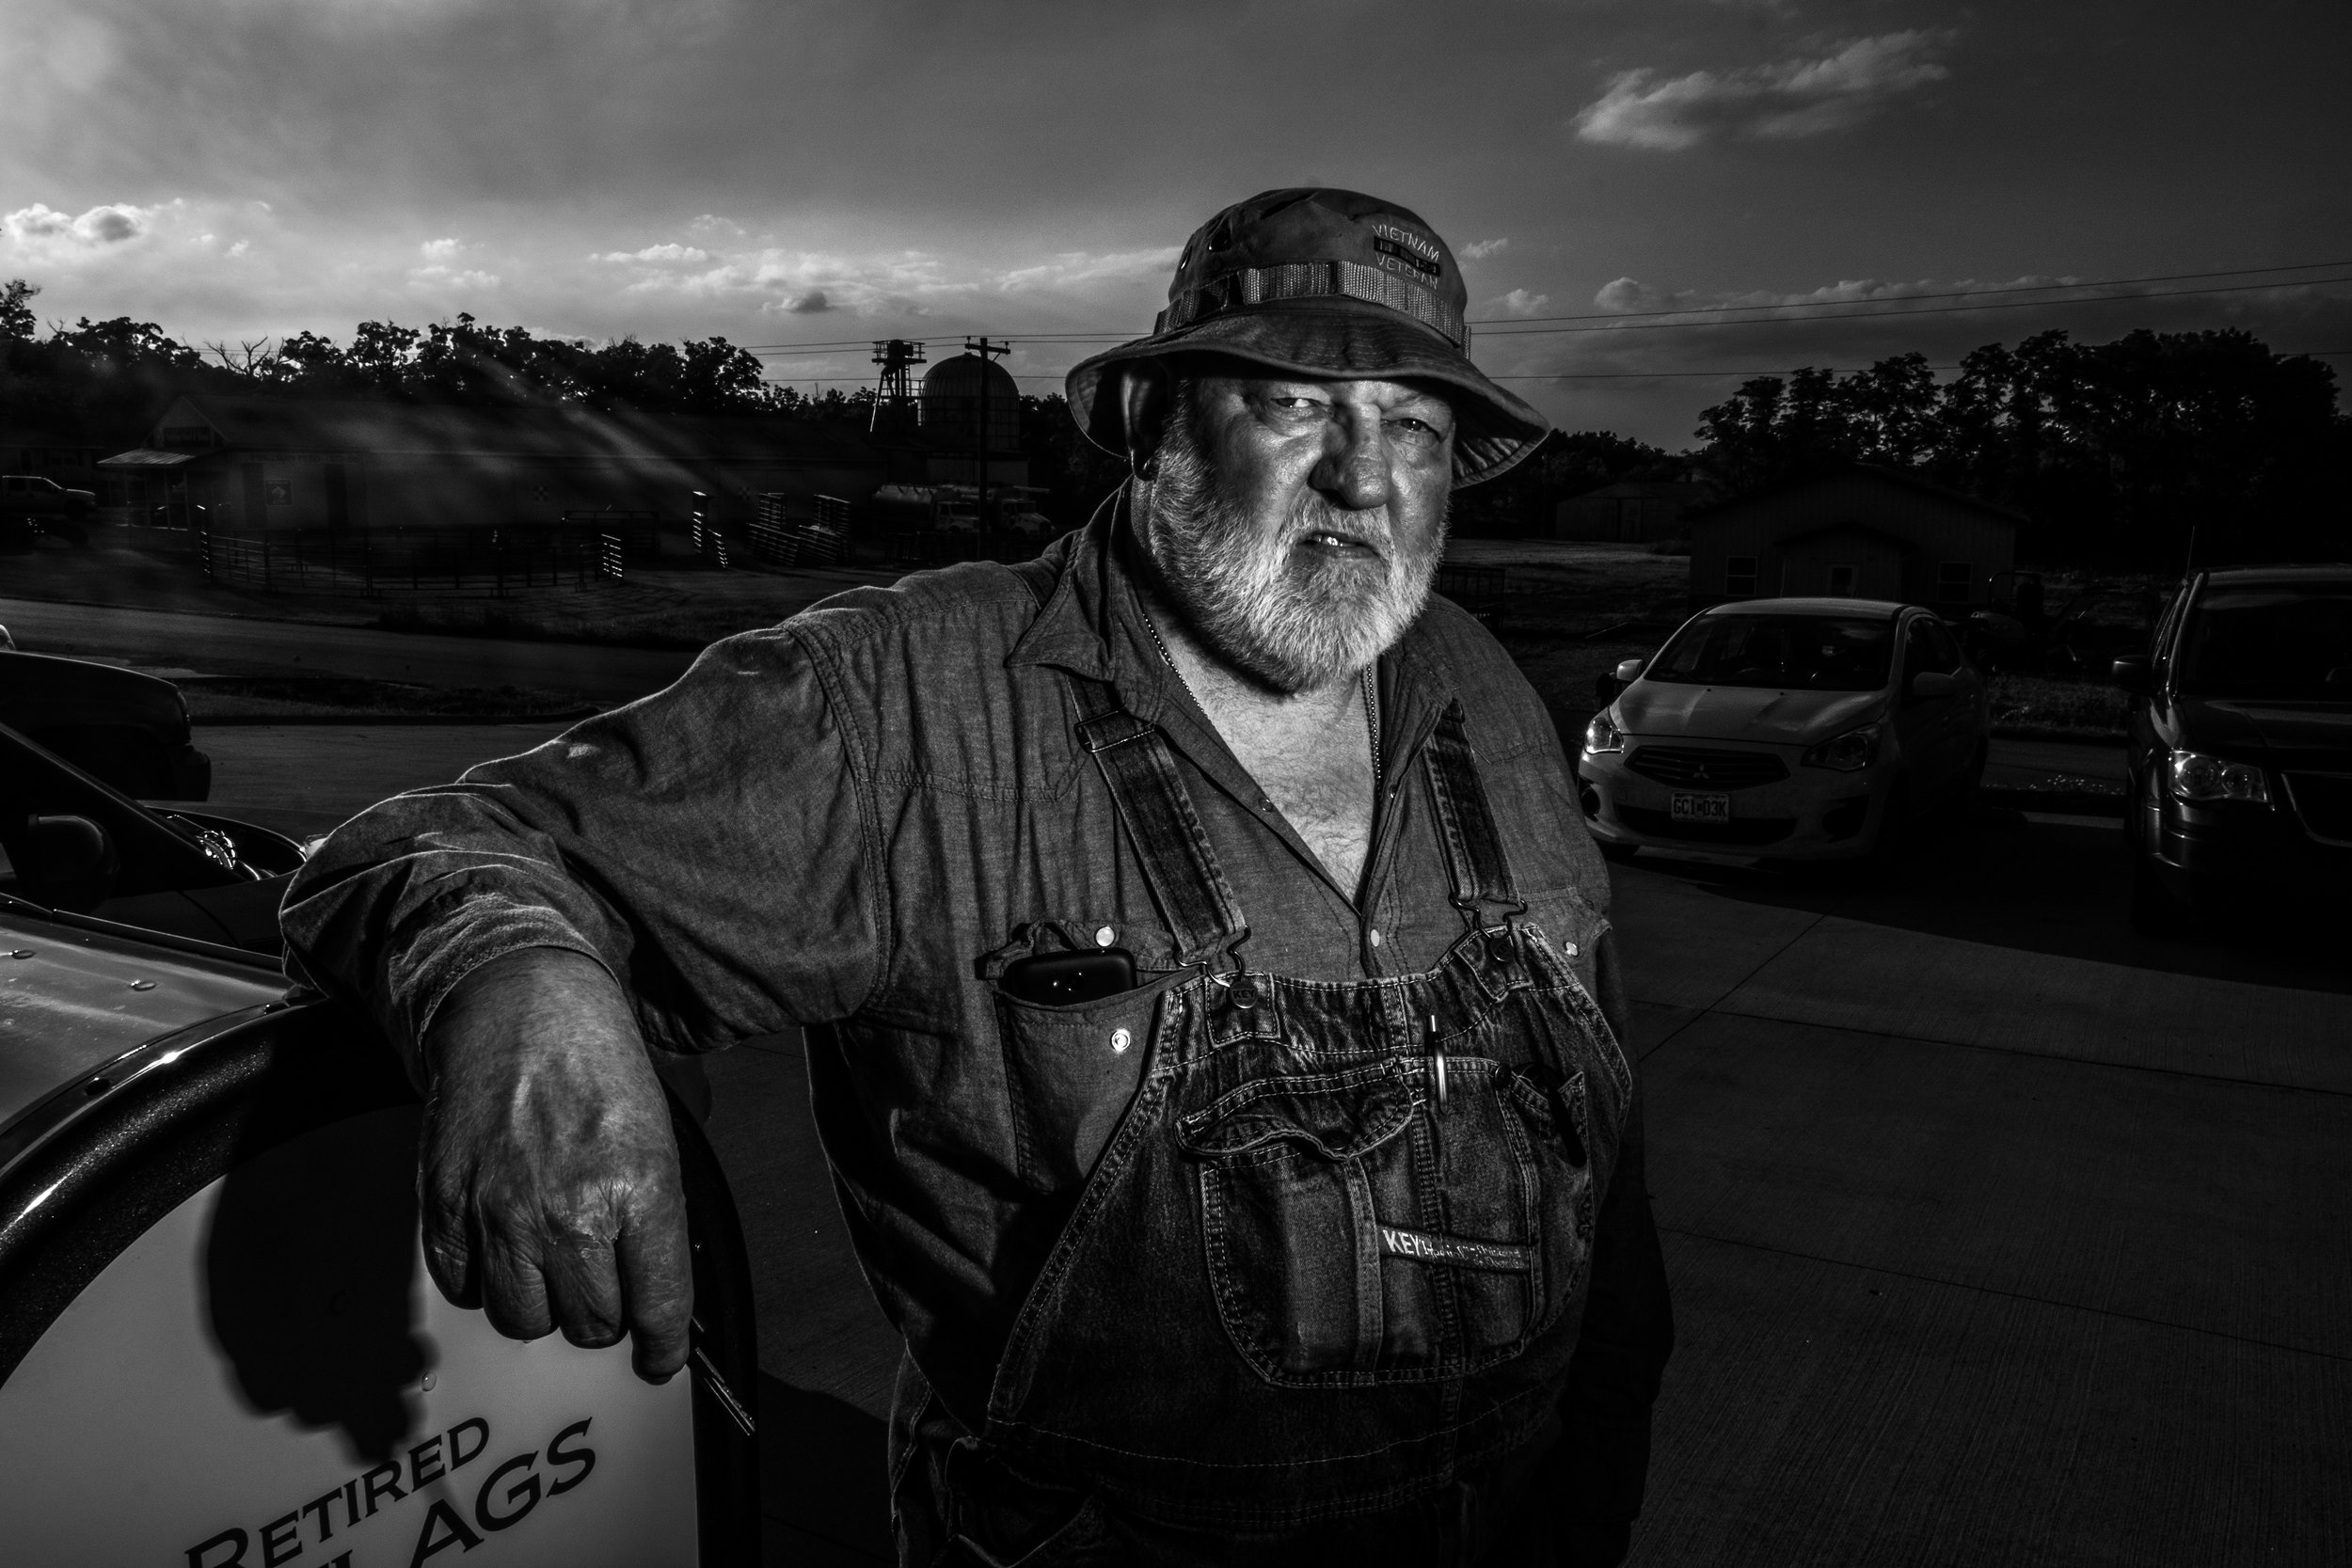  US Navy veteran and Vandalia resident, Randy Caldwell, poses for a portrait outside the VFW on Thursday, Jun. 20, 2019. Caldwell has been a lifetime member of the VFW and served as diesel mechanic in Vietnam in 1969. 